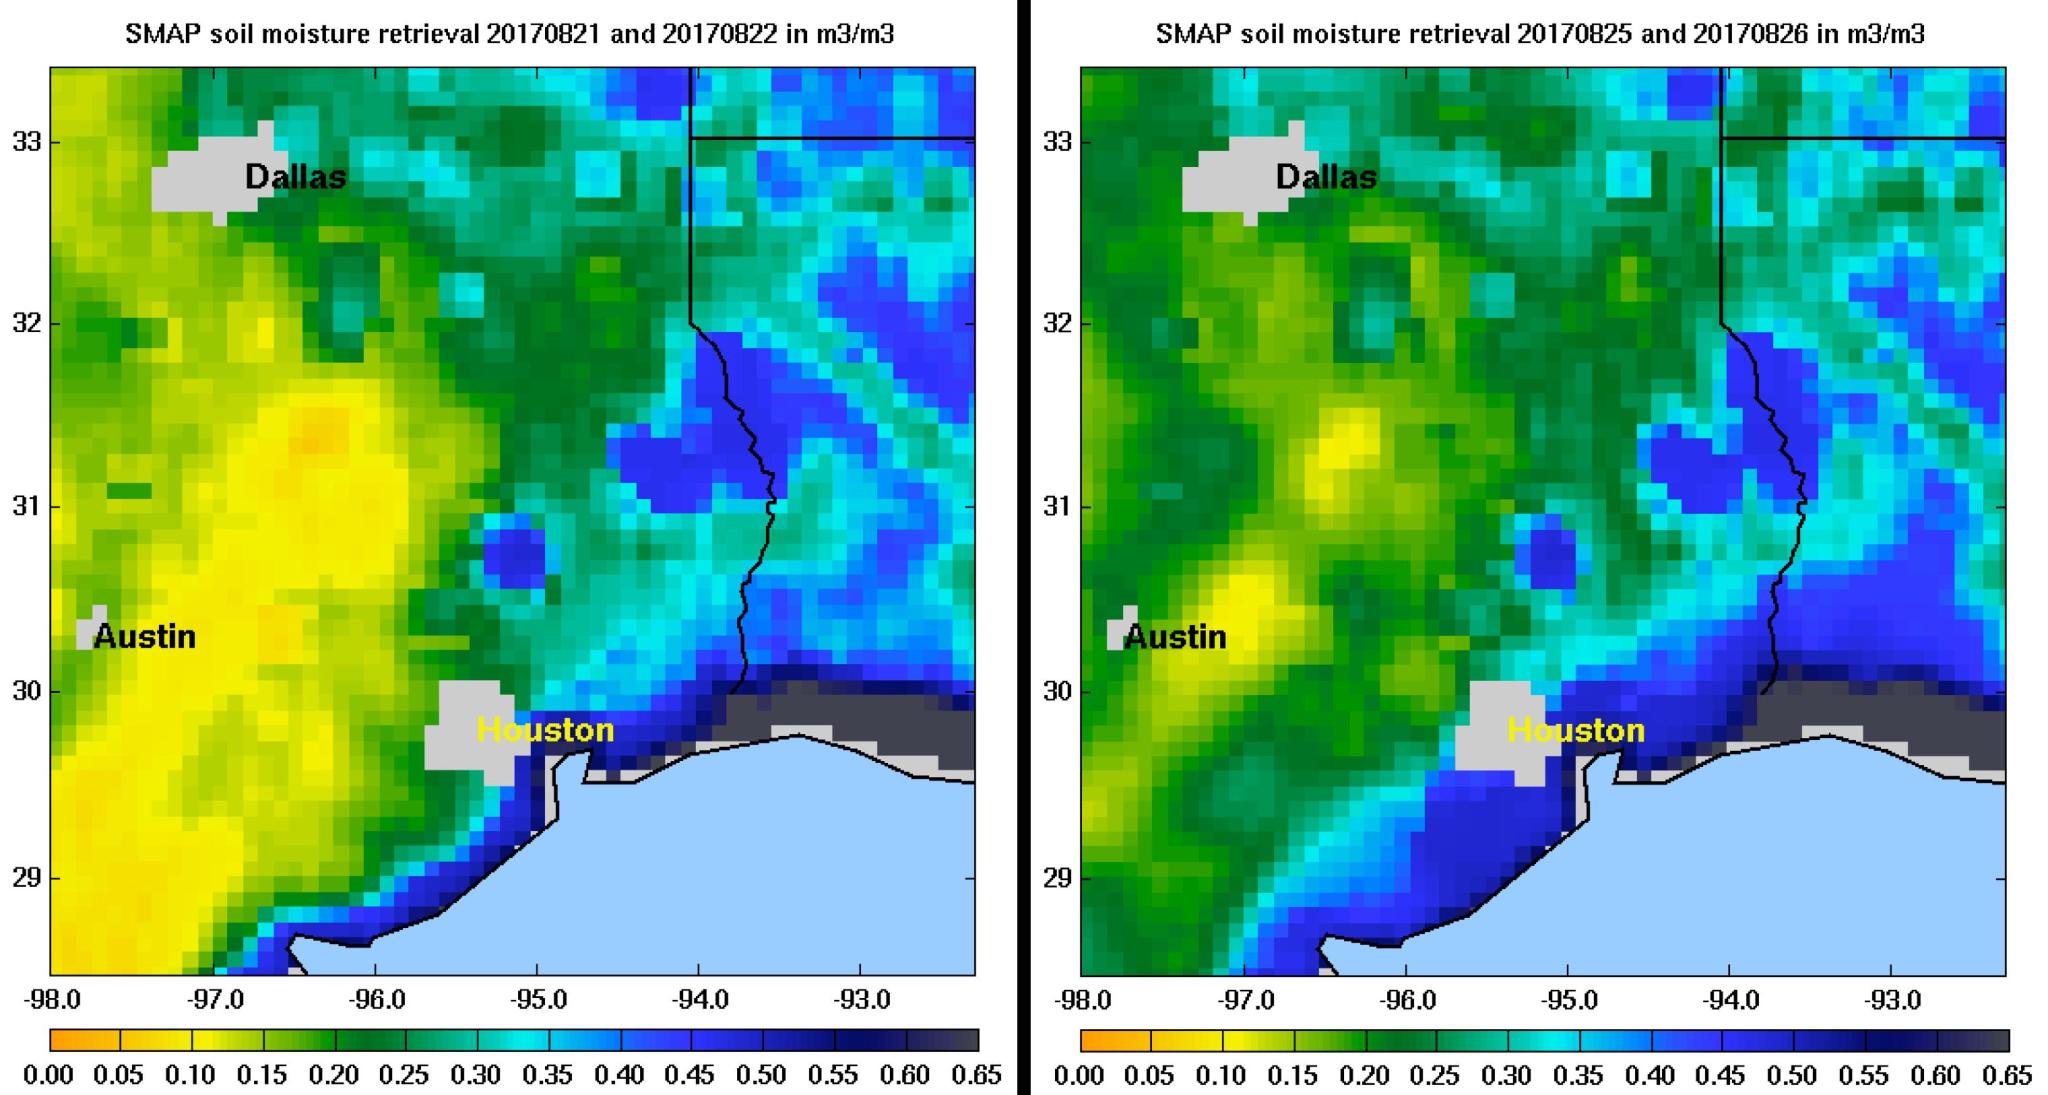 Two soil moisture observations southeastern Texas before and after Harvey. The first image from August 21 and 22 show blue, wet soil along the coast with yellow, less wet soil further inland. The second, from August 25 and 26, shows more dark blue heavy moisture along the coast and green, moderate moisture inland.